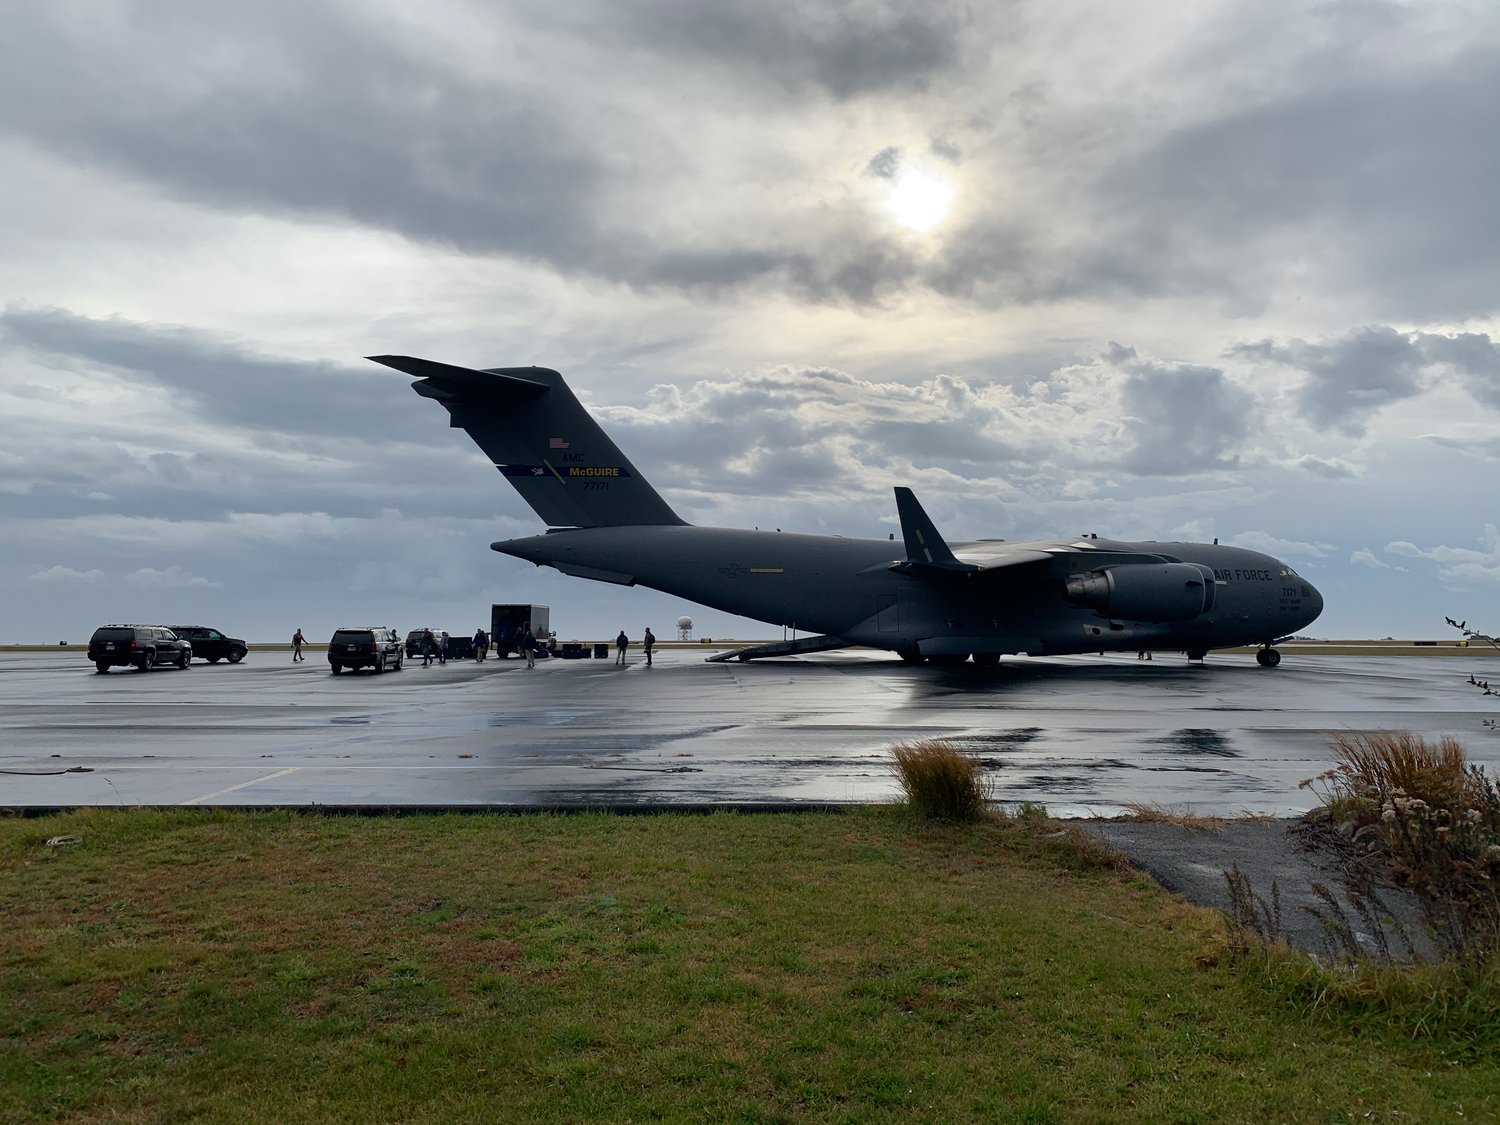 A U.S. Air Force cargo plane lands at Nantucket Memorial Airport Monday morning, unloading more vehicles and cargo in advance of President Joe Biden's Thanksgiving visit this week.